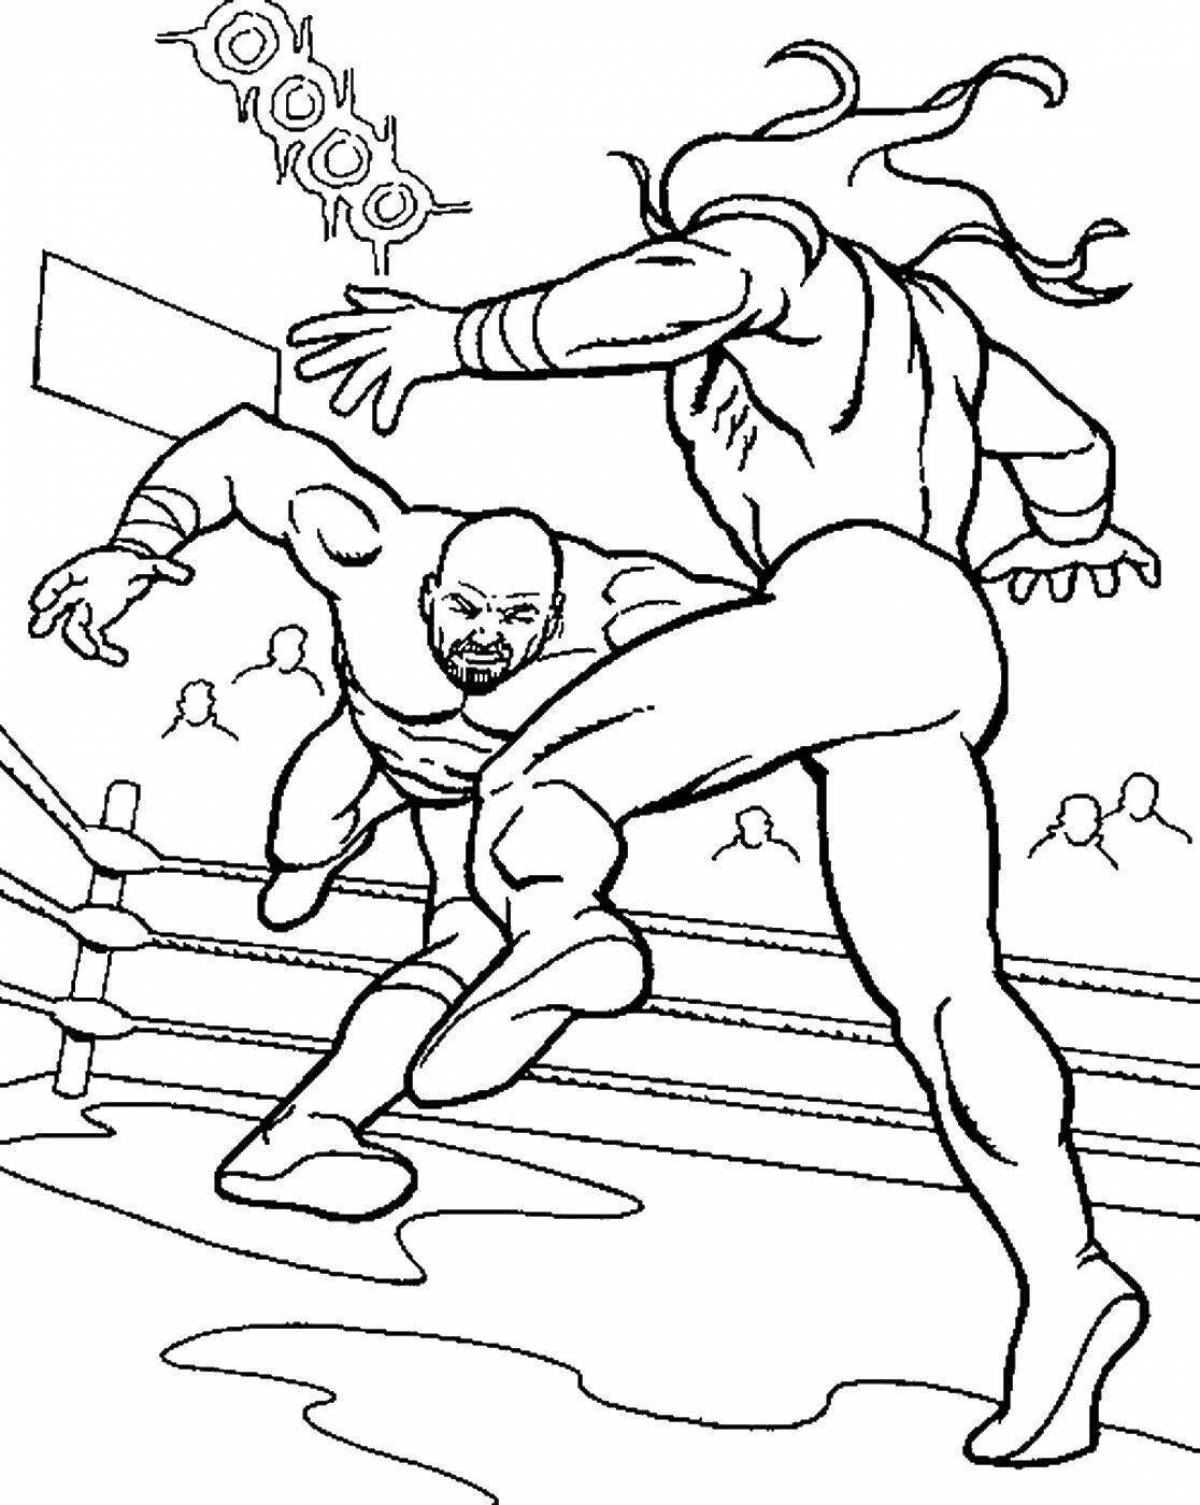 Coloring book brave freestyle wrestling